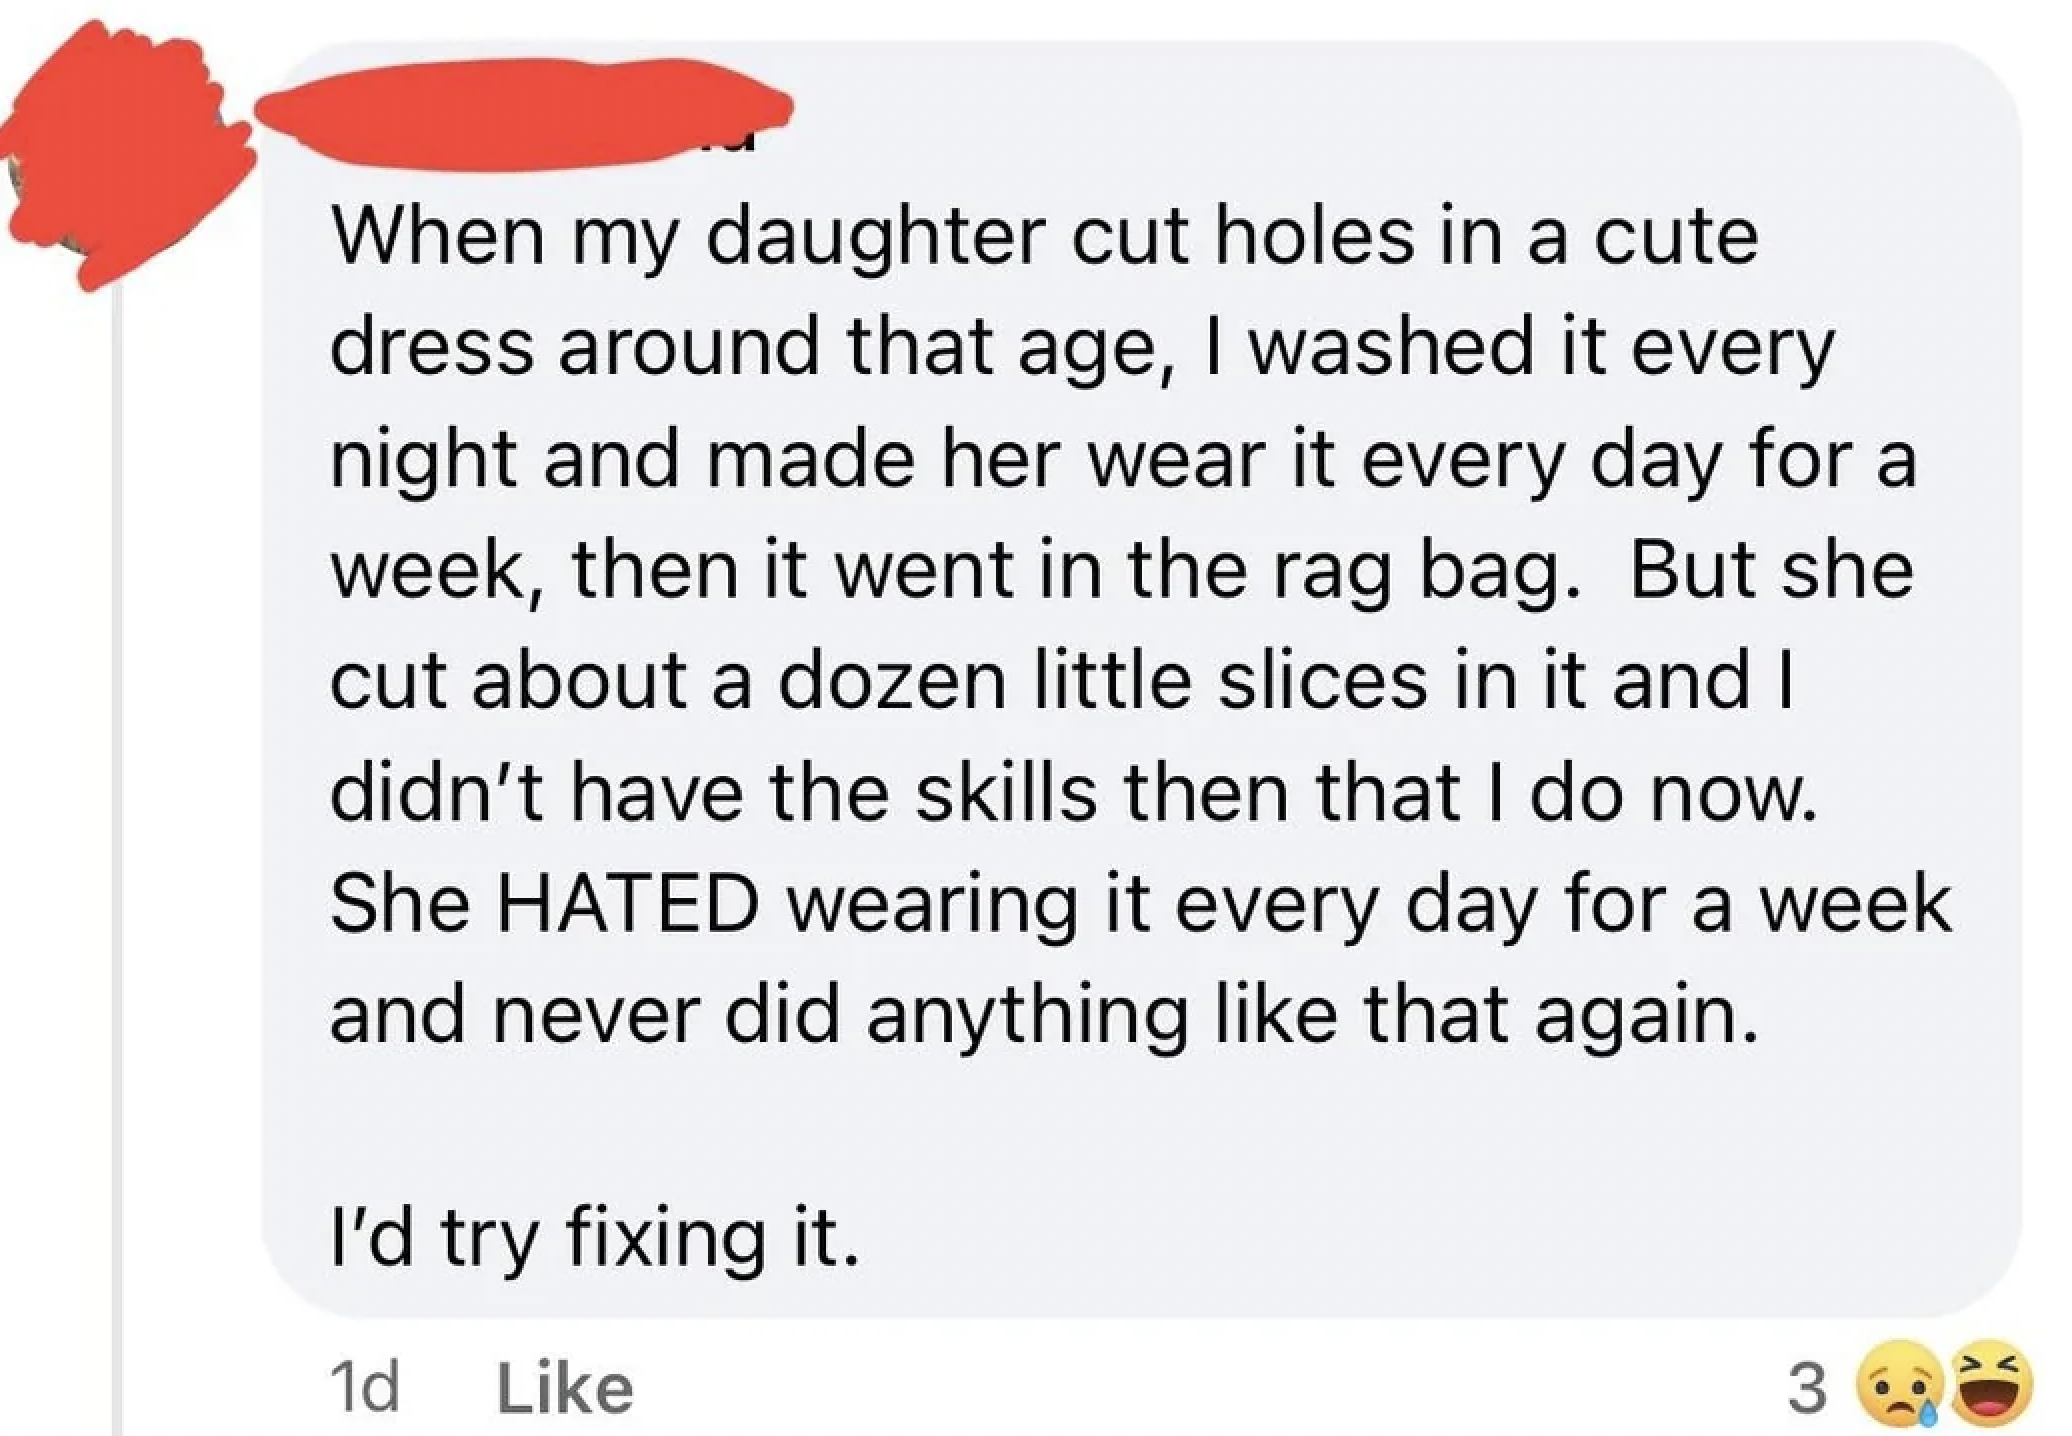 screenshot - When my daughter cut holes in a cute dress around that age, I washed it every night and made her wear it every day for a week, then it went in the rag bag. But she cut about a dozen little slices in it and I didn't have the skills then that I